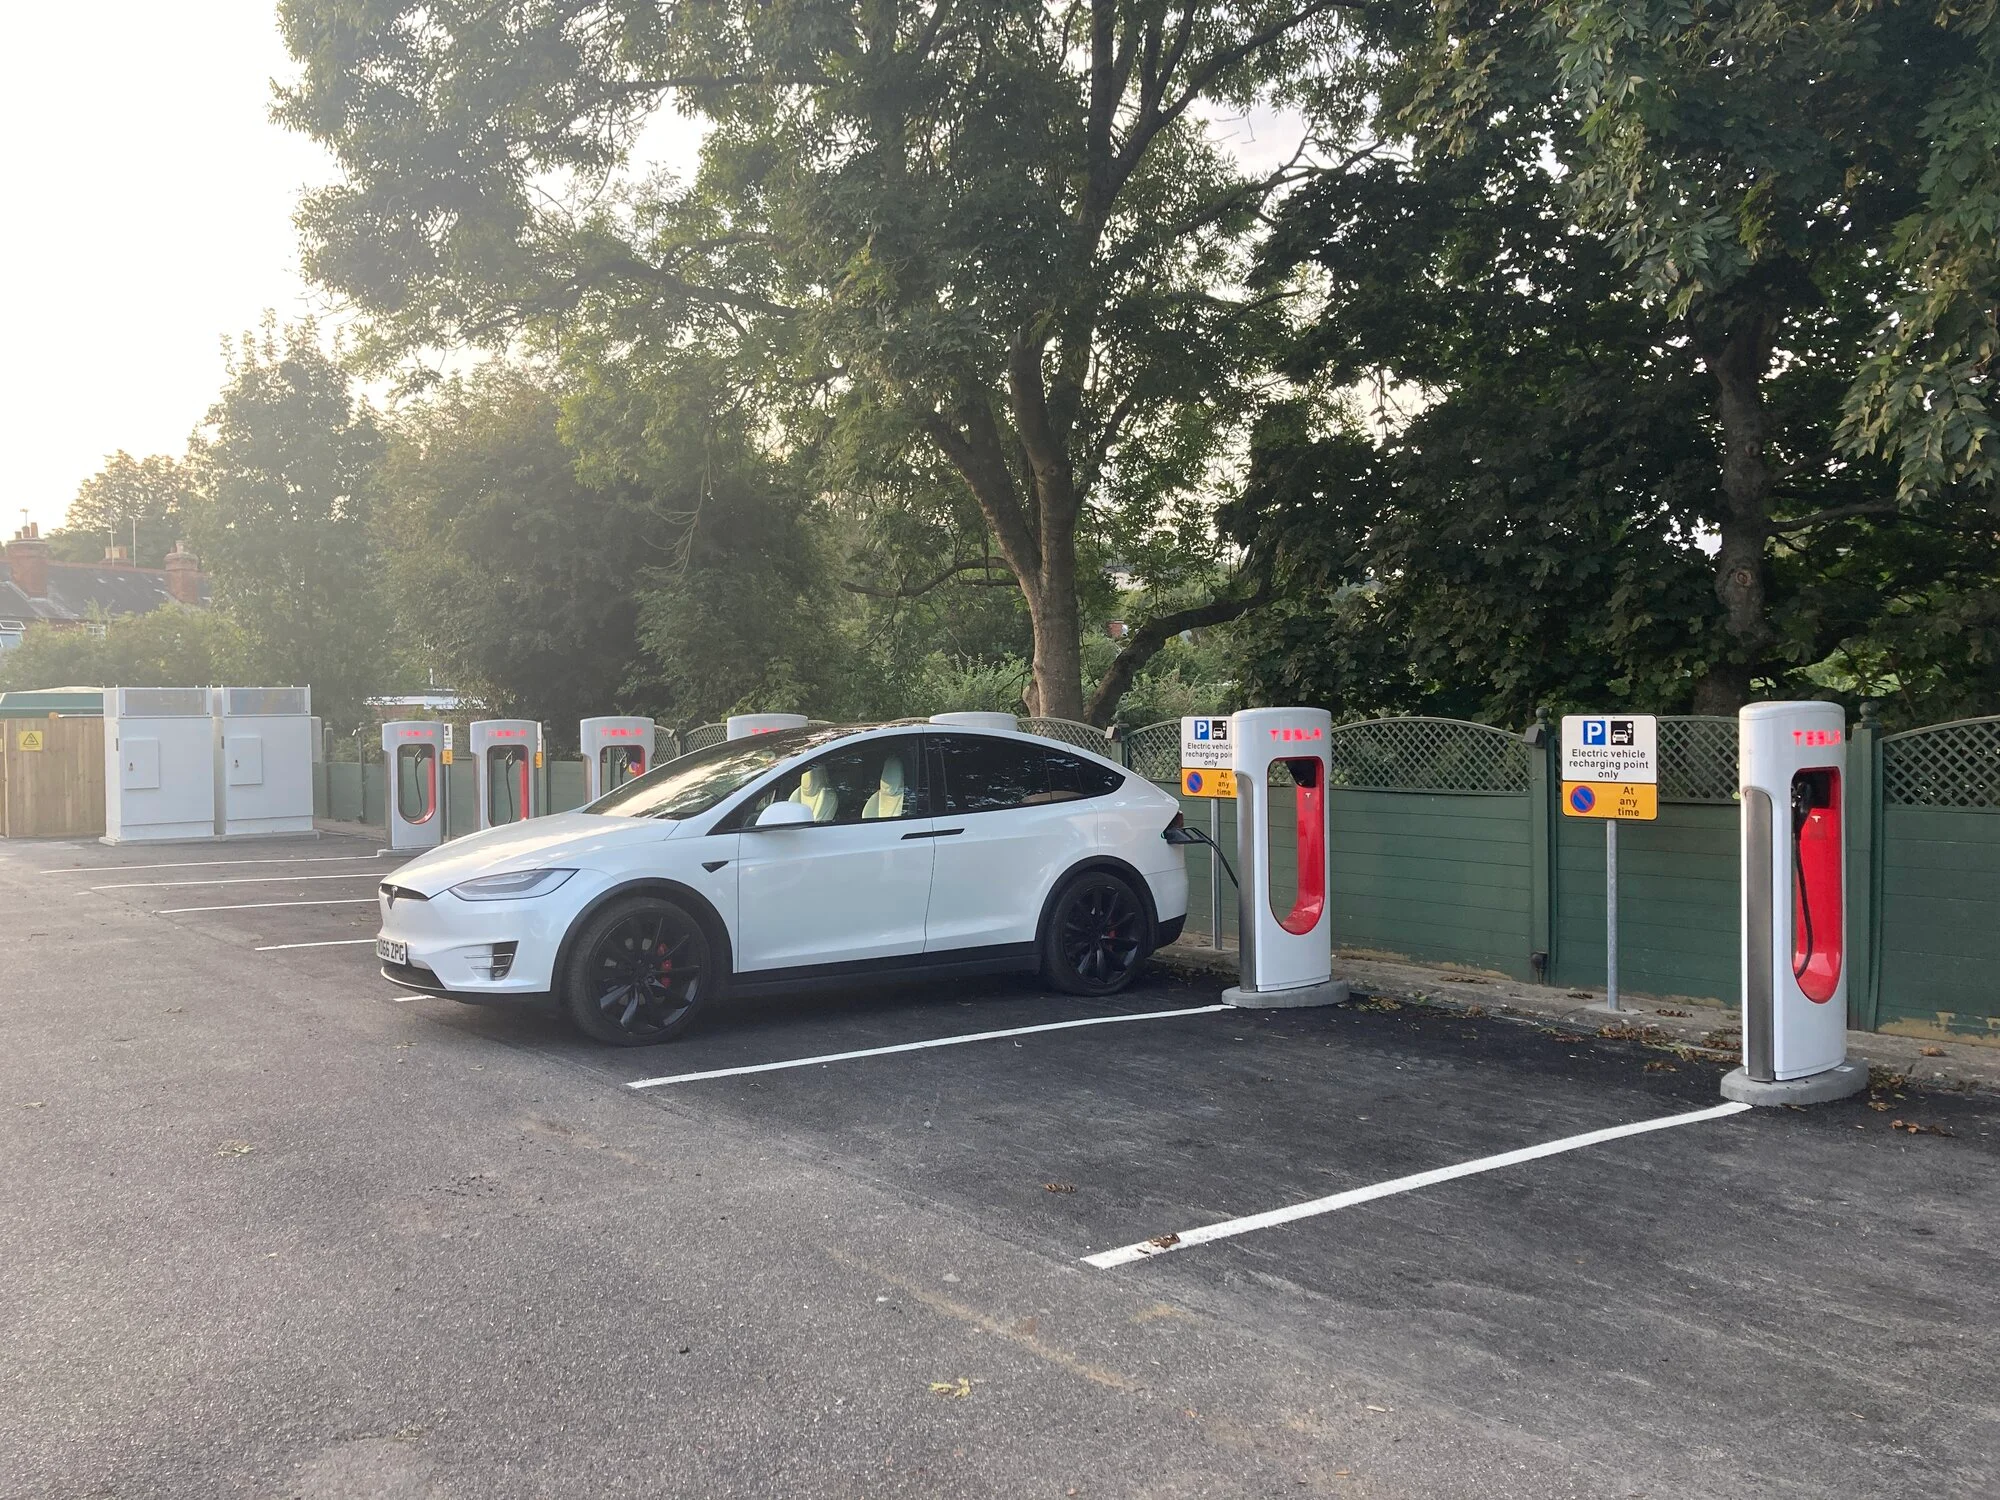 Supercharger sites' data which need updating or contain errors